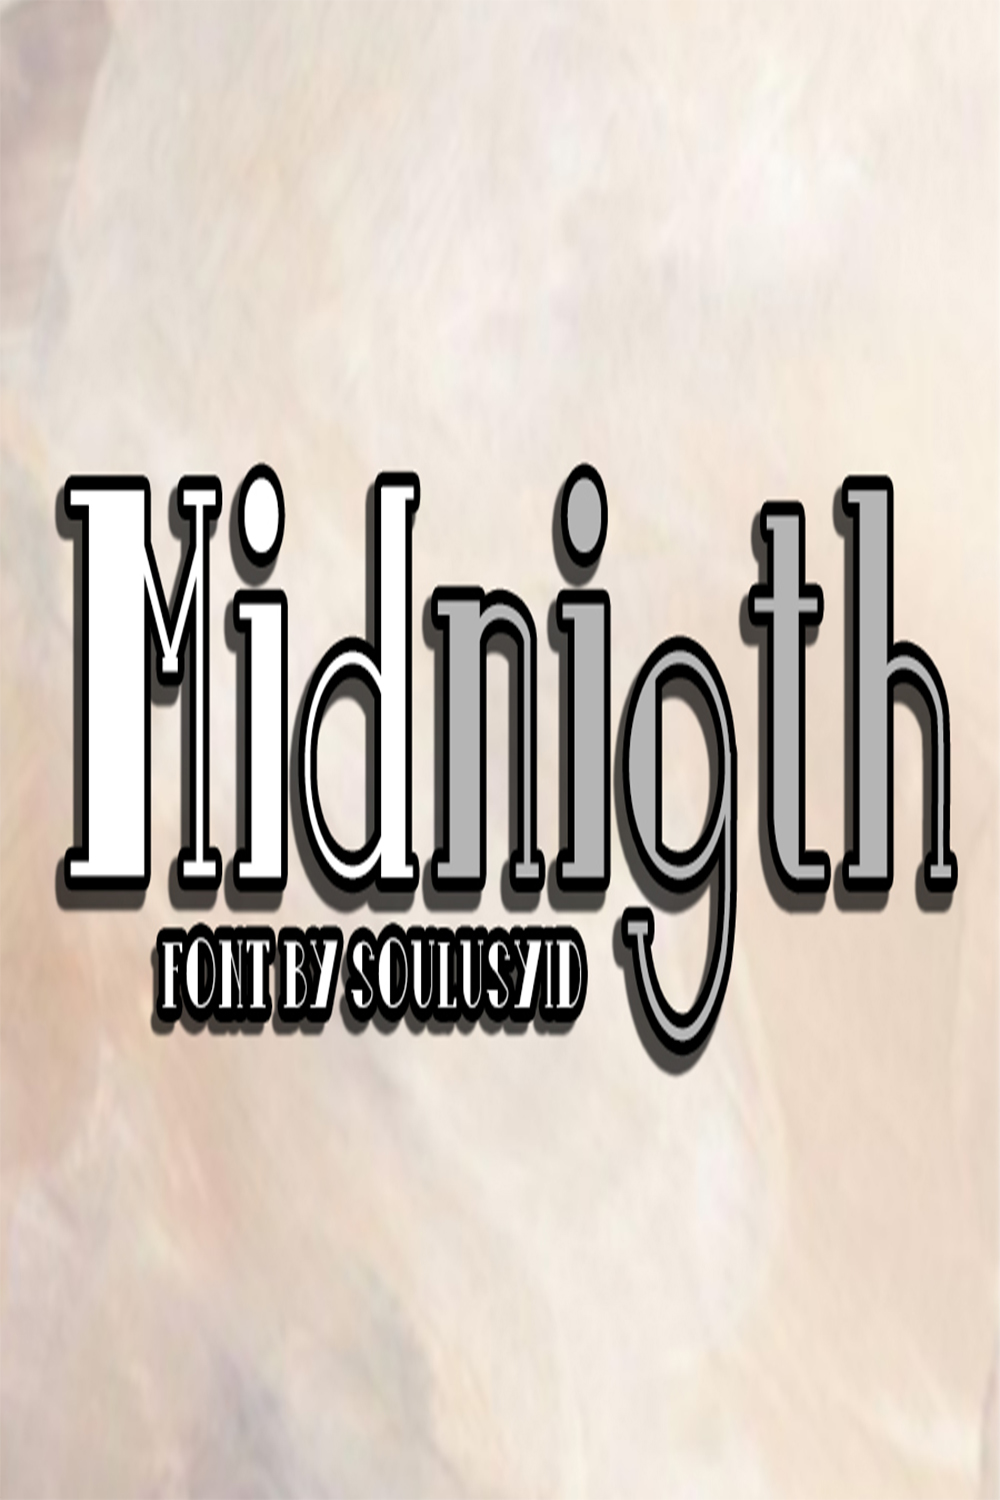 Midnigth pinterest preview image.